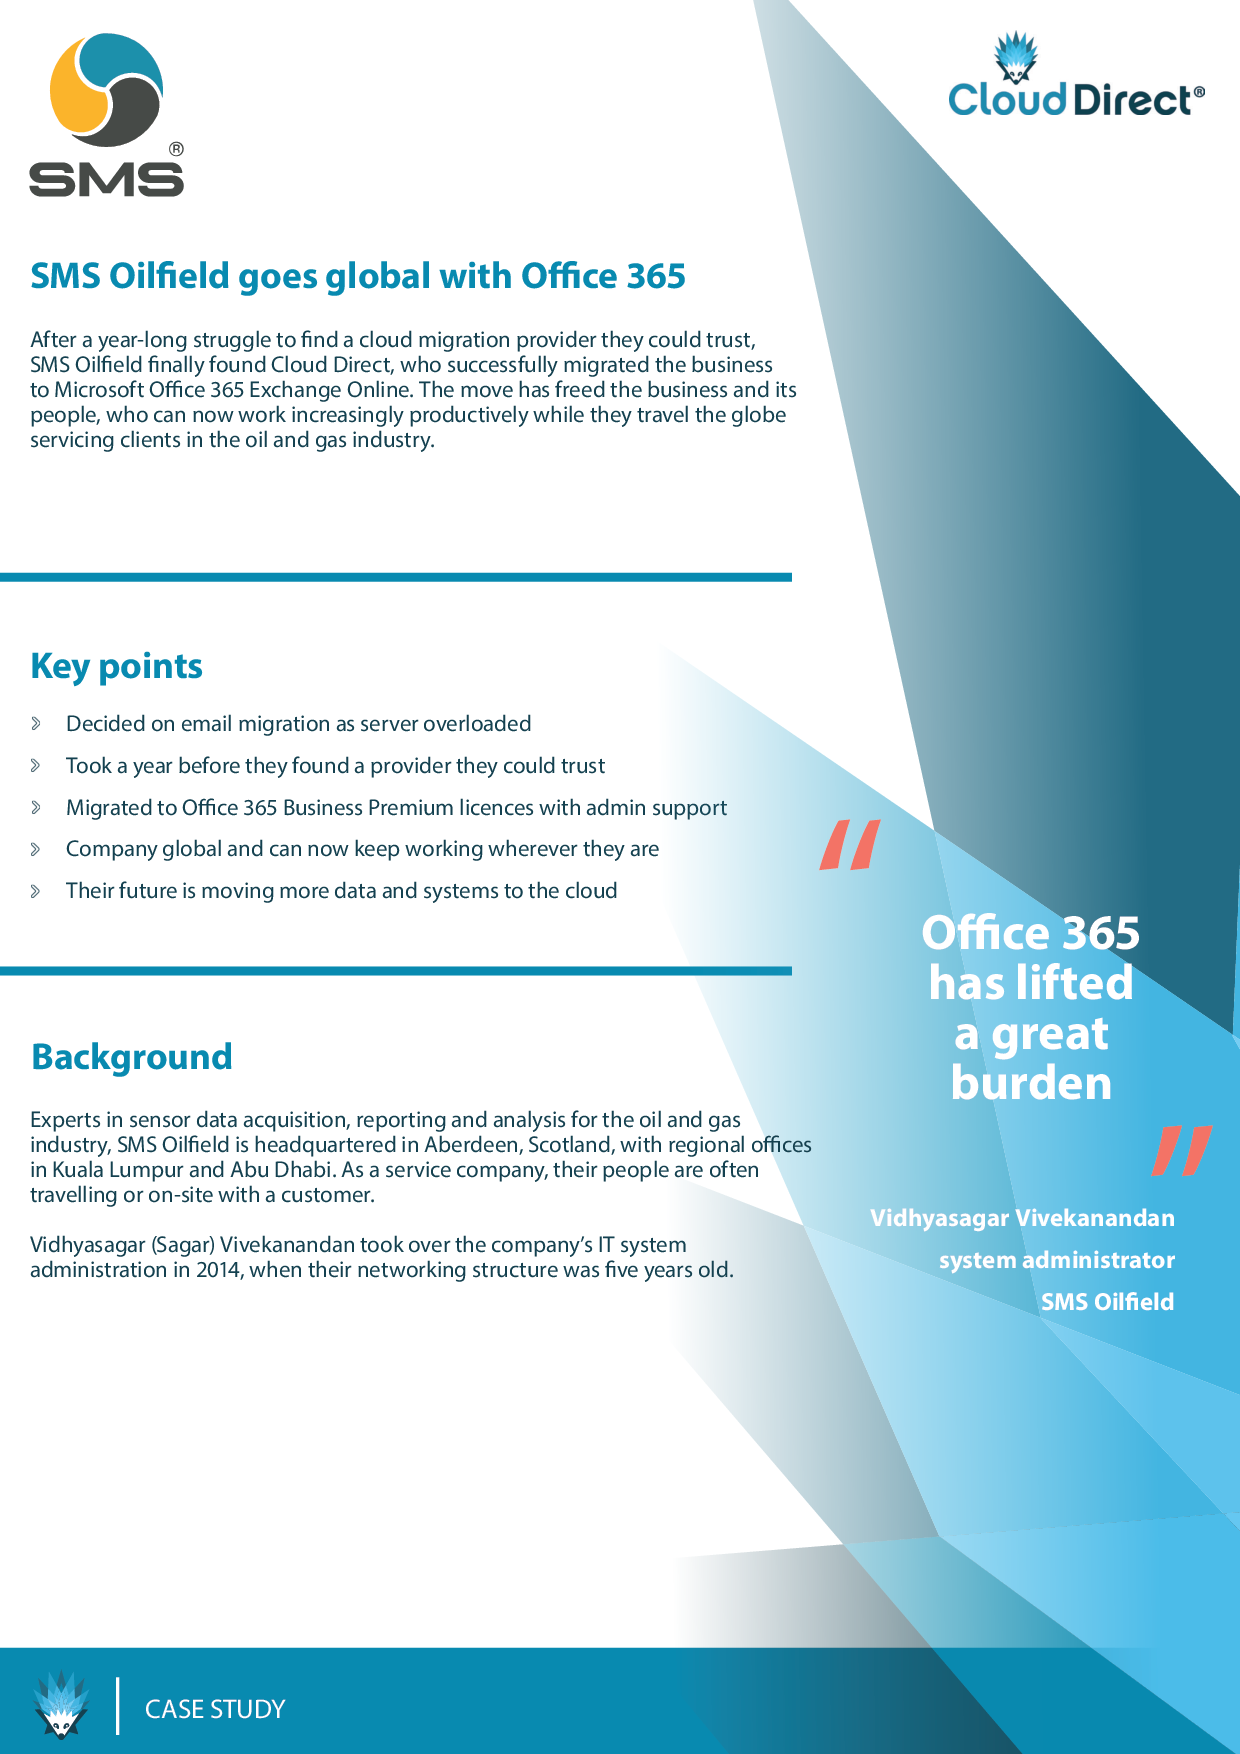 SMS Oilfield goes global with Office 365